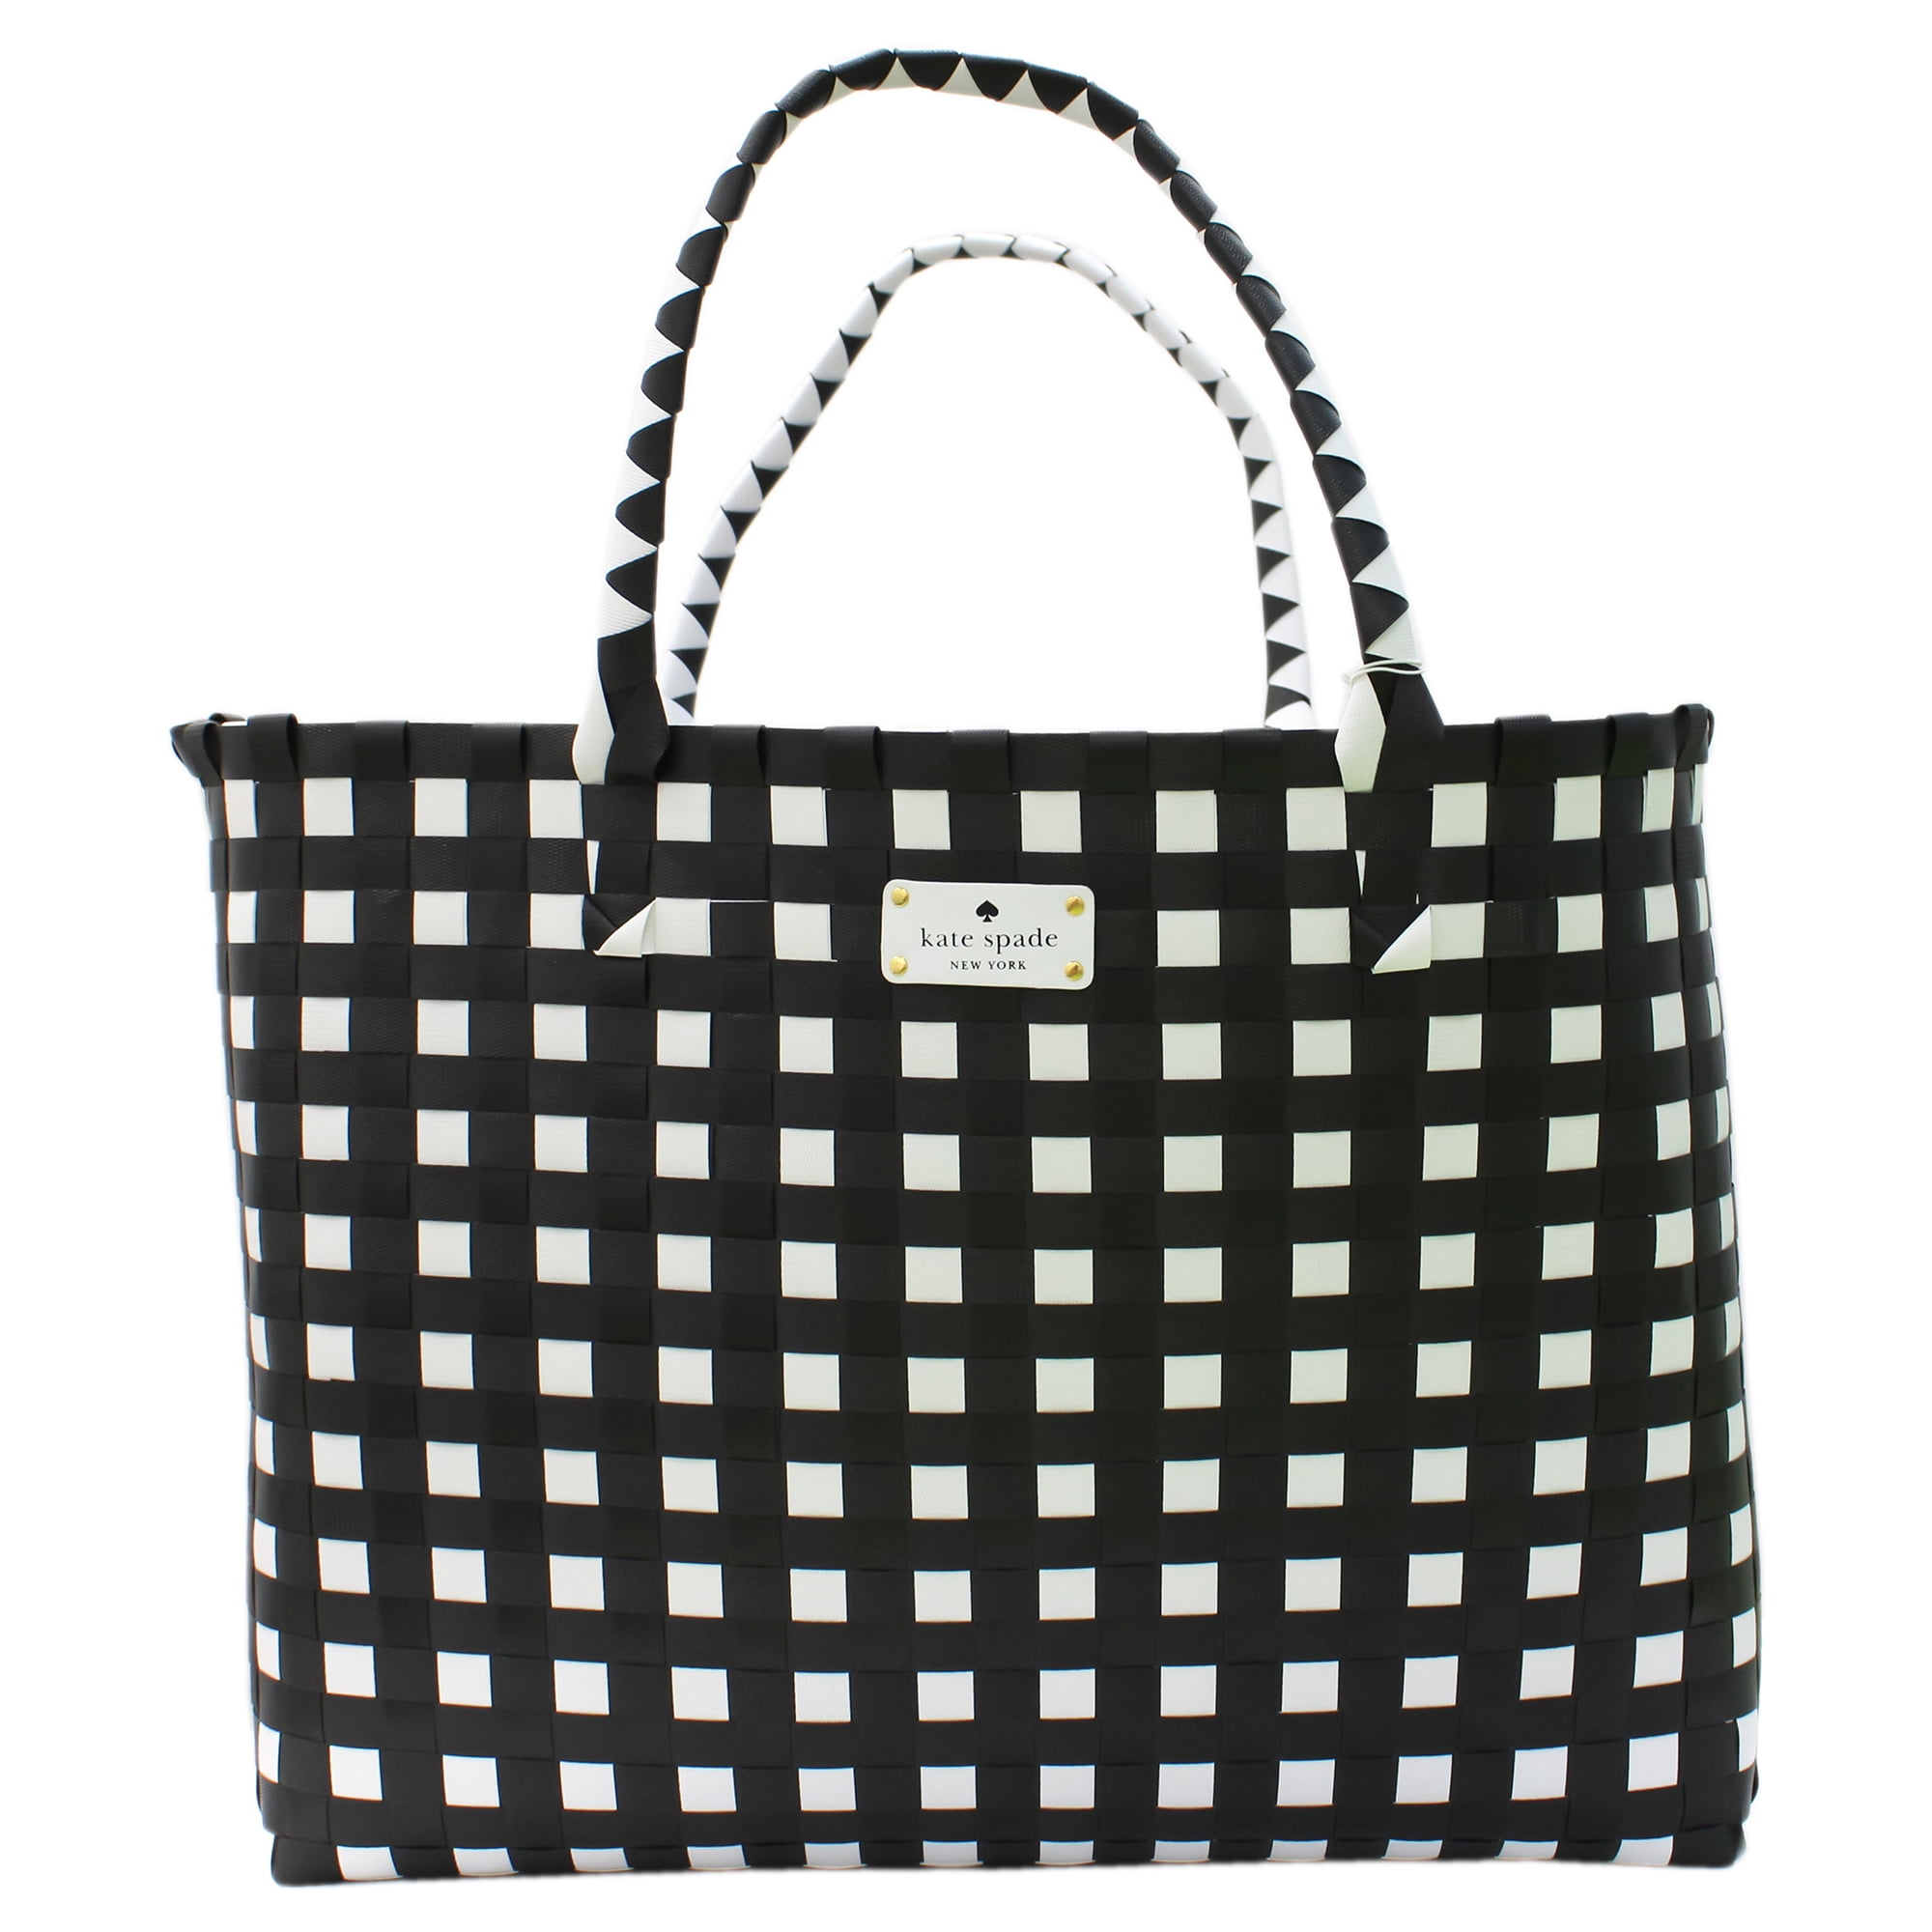 Braided Tote Hand Bag - Black-White by Kate Spade for Women - 1 Pc Bag |  Walmart Canada